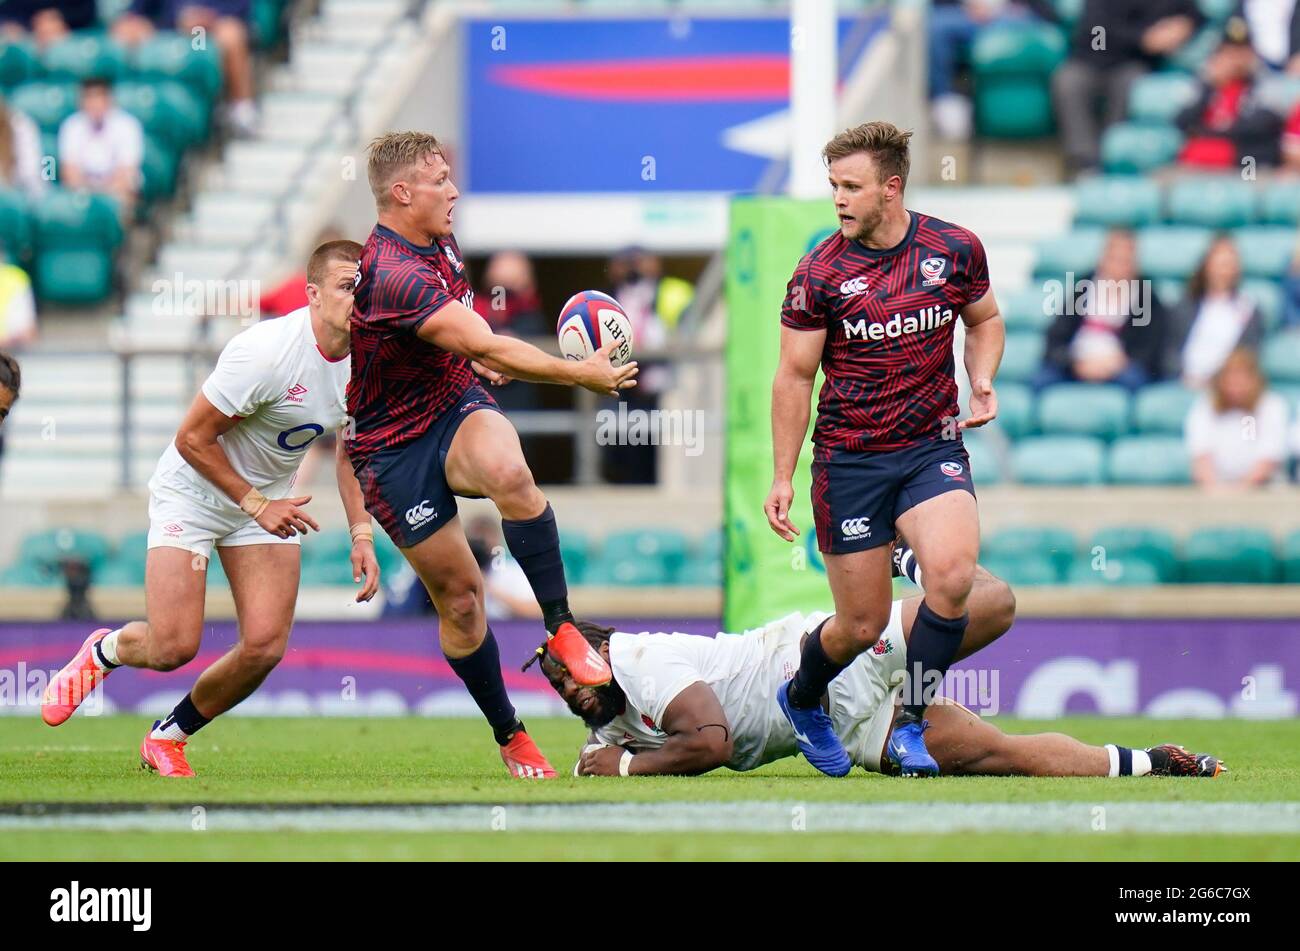 USA Rugby's Hanco Germishuys passes to centre Calvin Whiting during the  England -V- USA Rugby match on Saturday, July 4, 2021, at Twickenham  Stadium, Middlesex, United Kingdom. (Steve Flynn/Image of Sport/Sipa USA